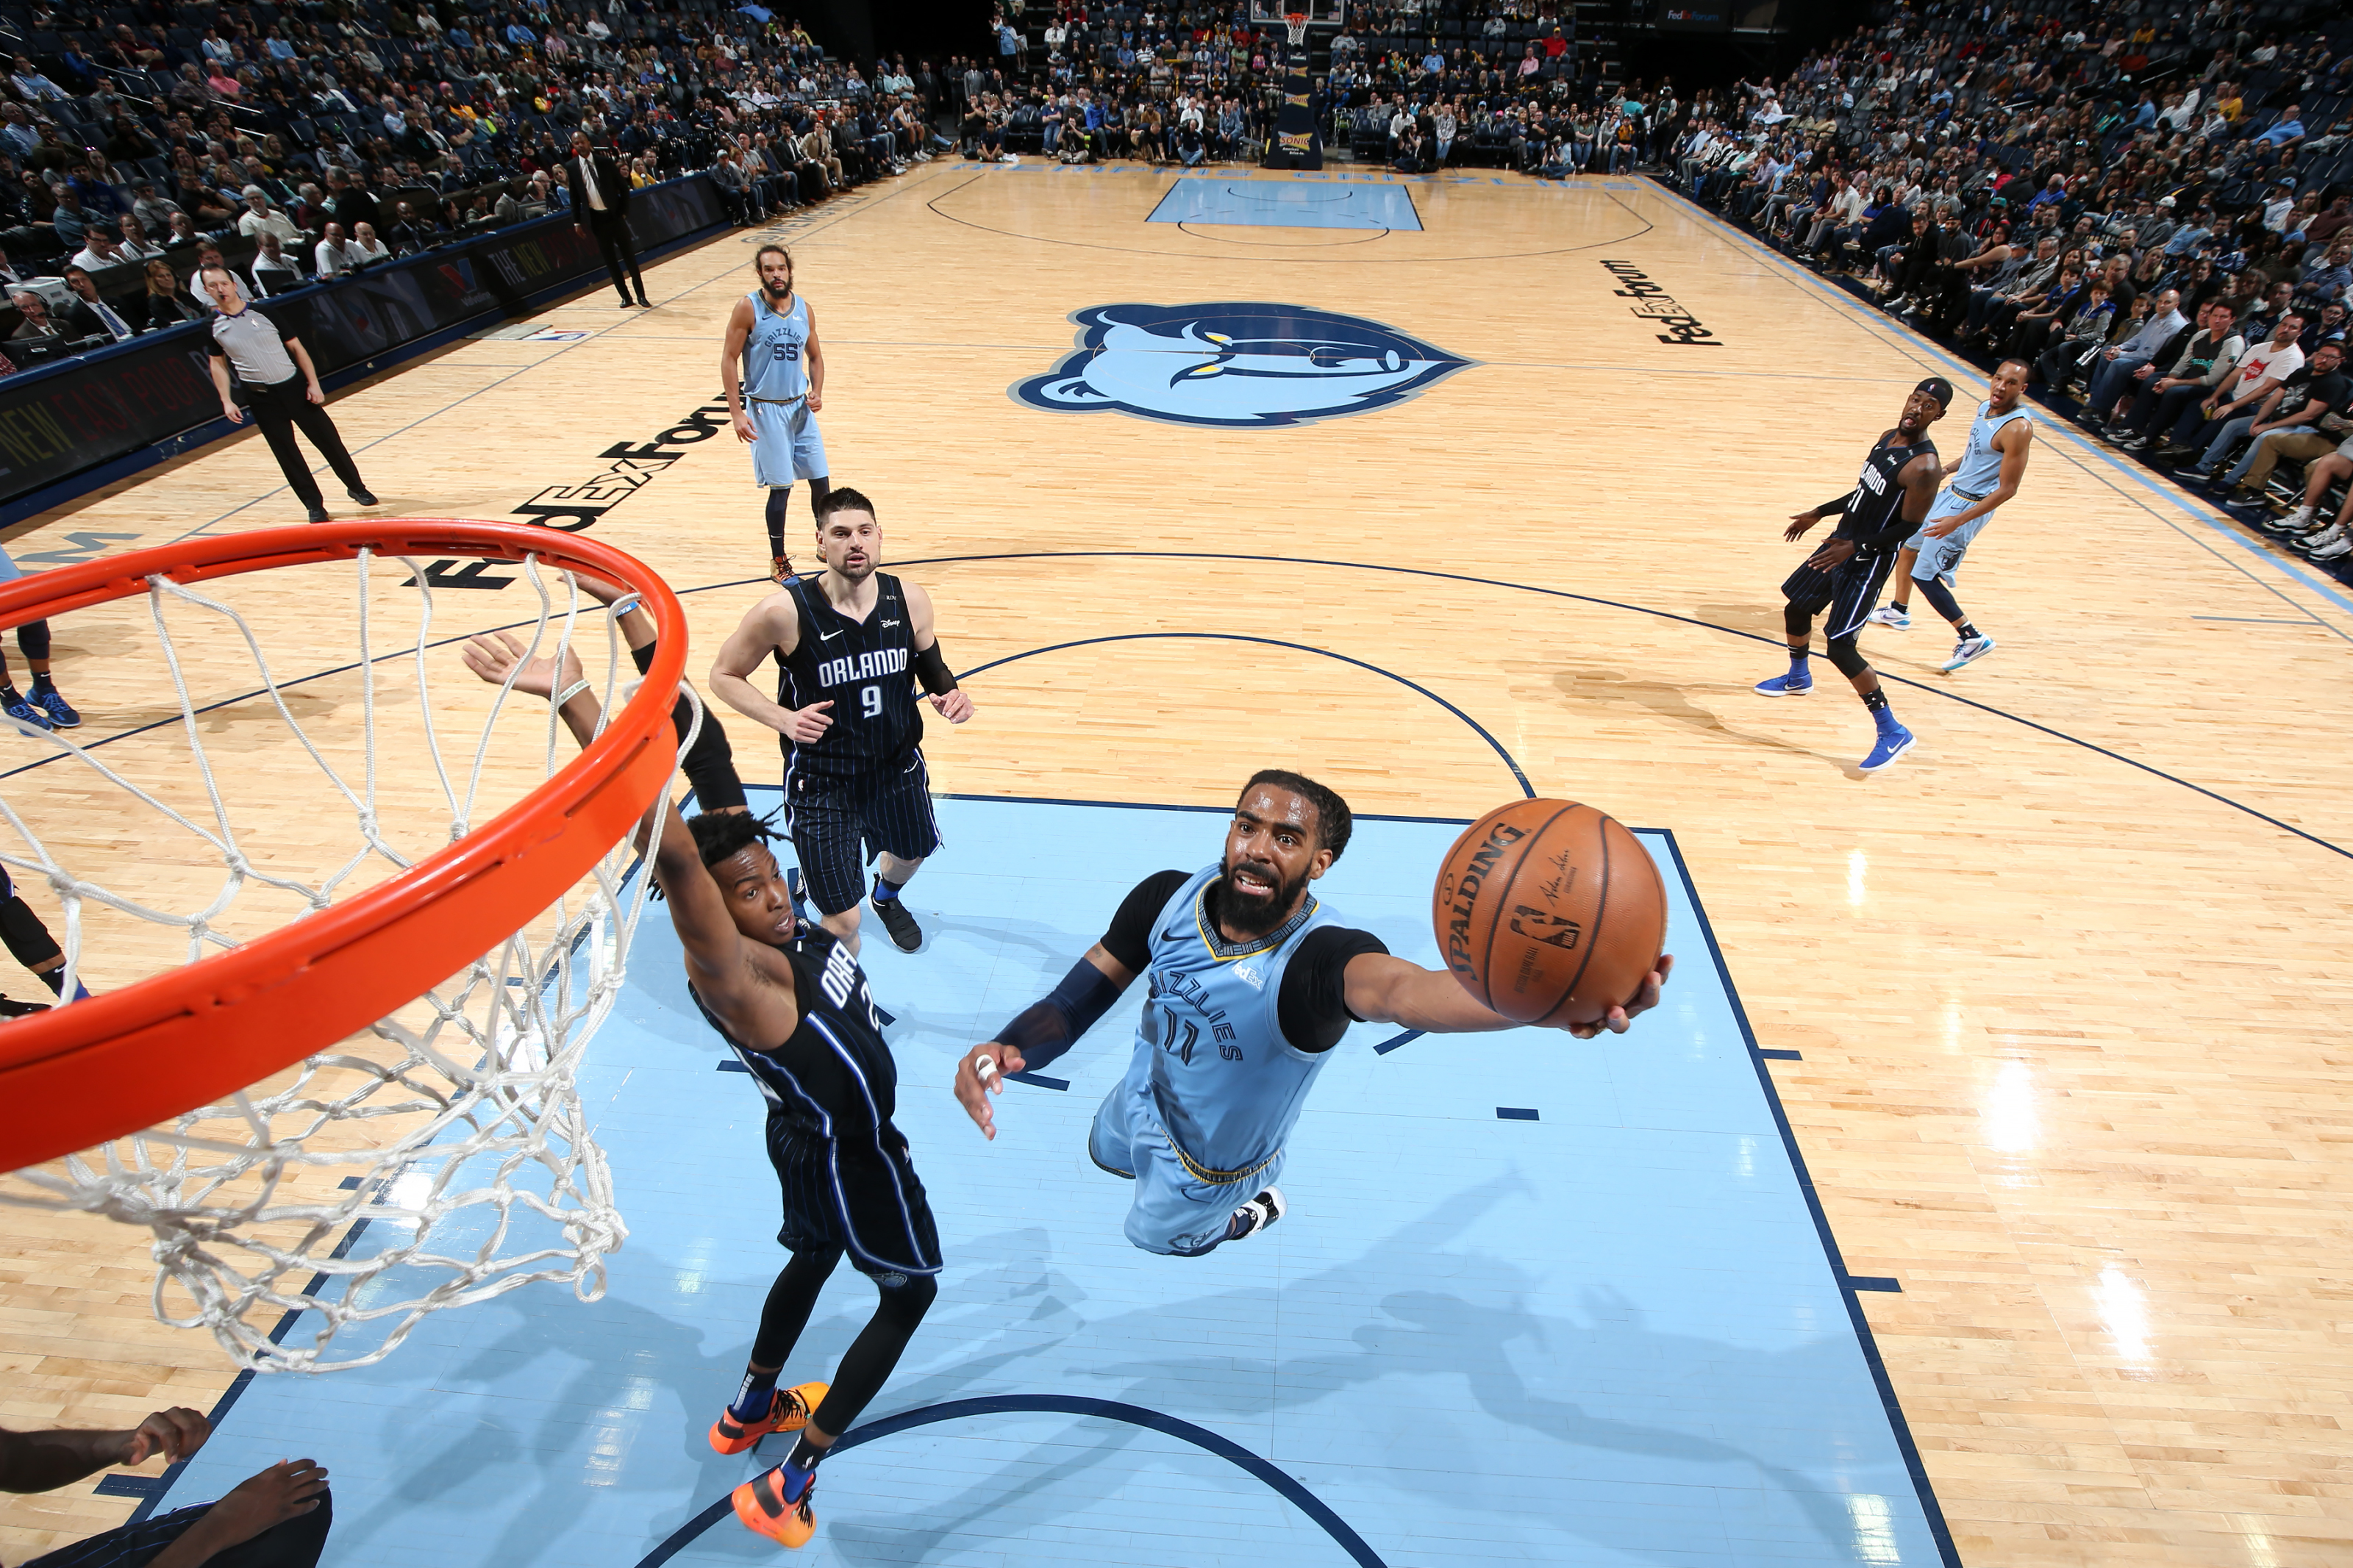 Memphis Grizzlies: Mike Conley One Step Closer to Next Level